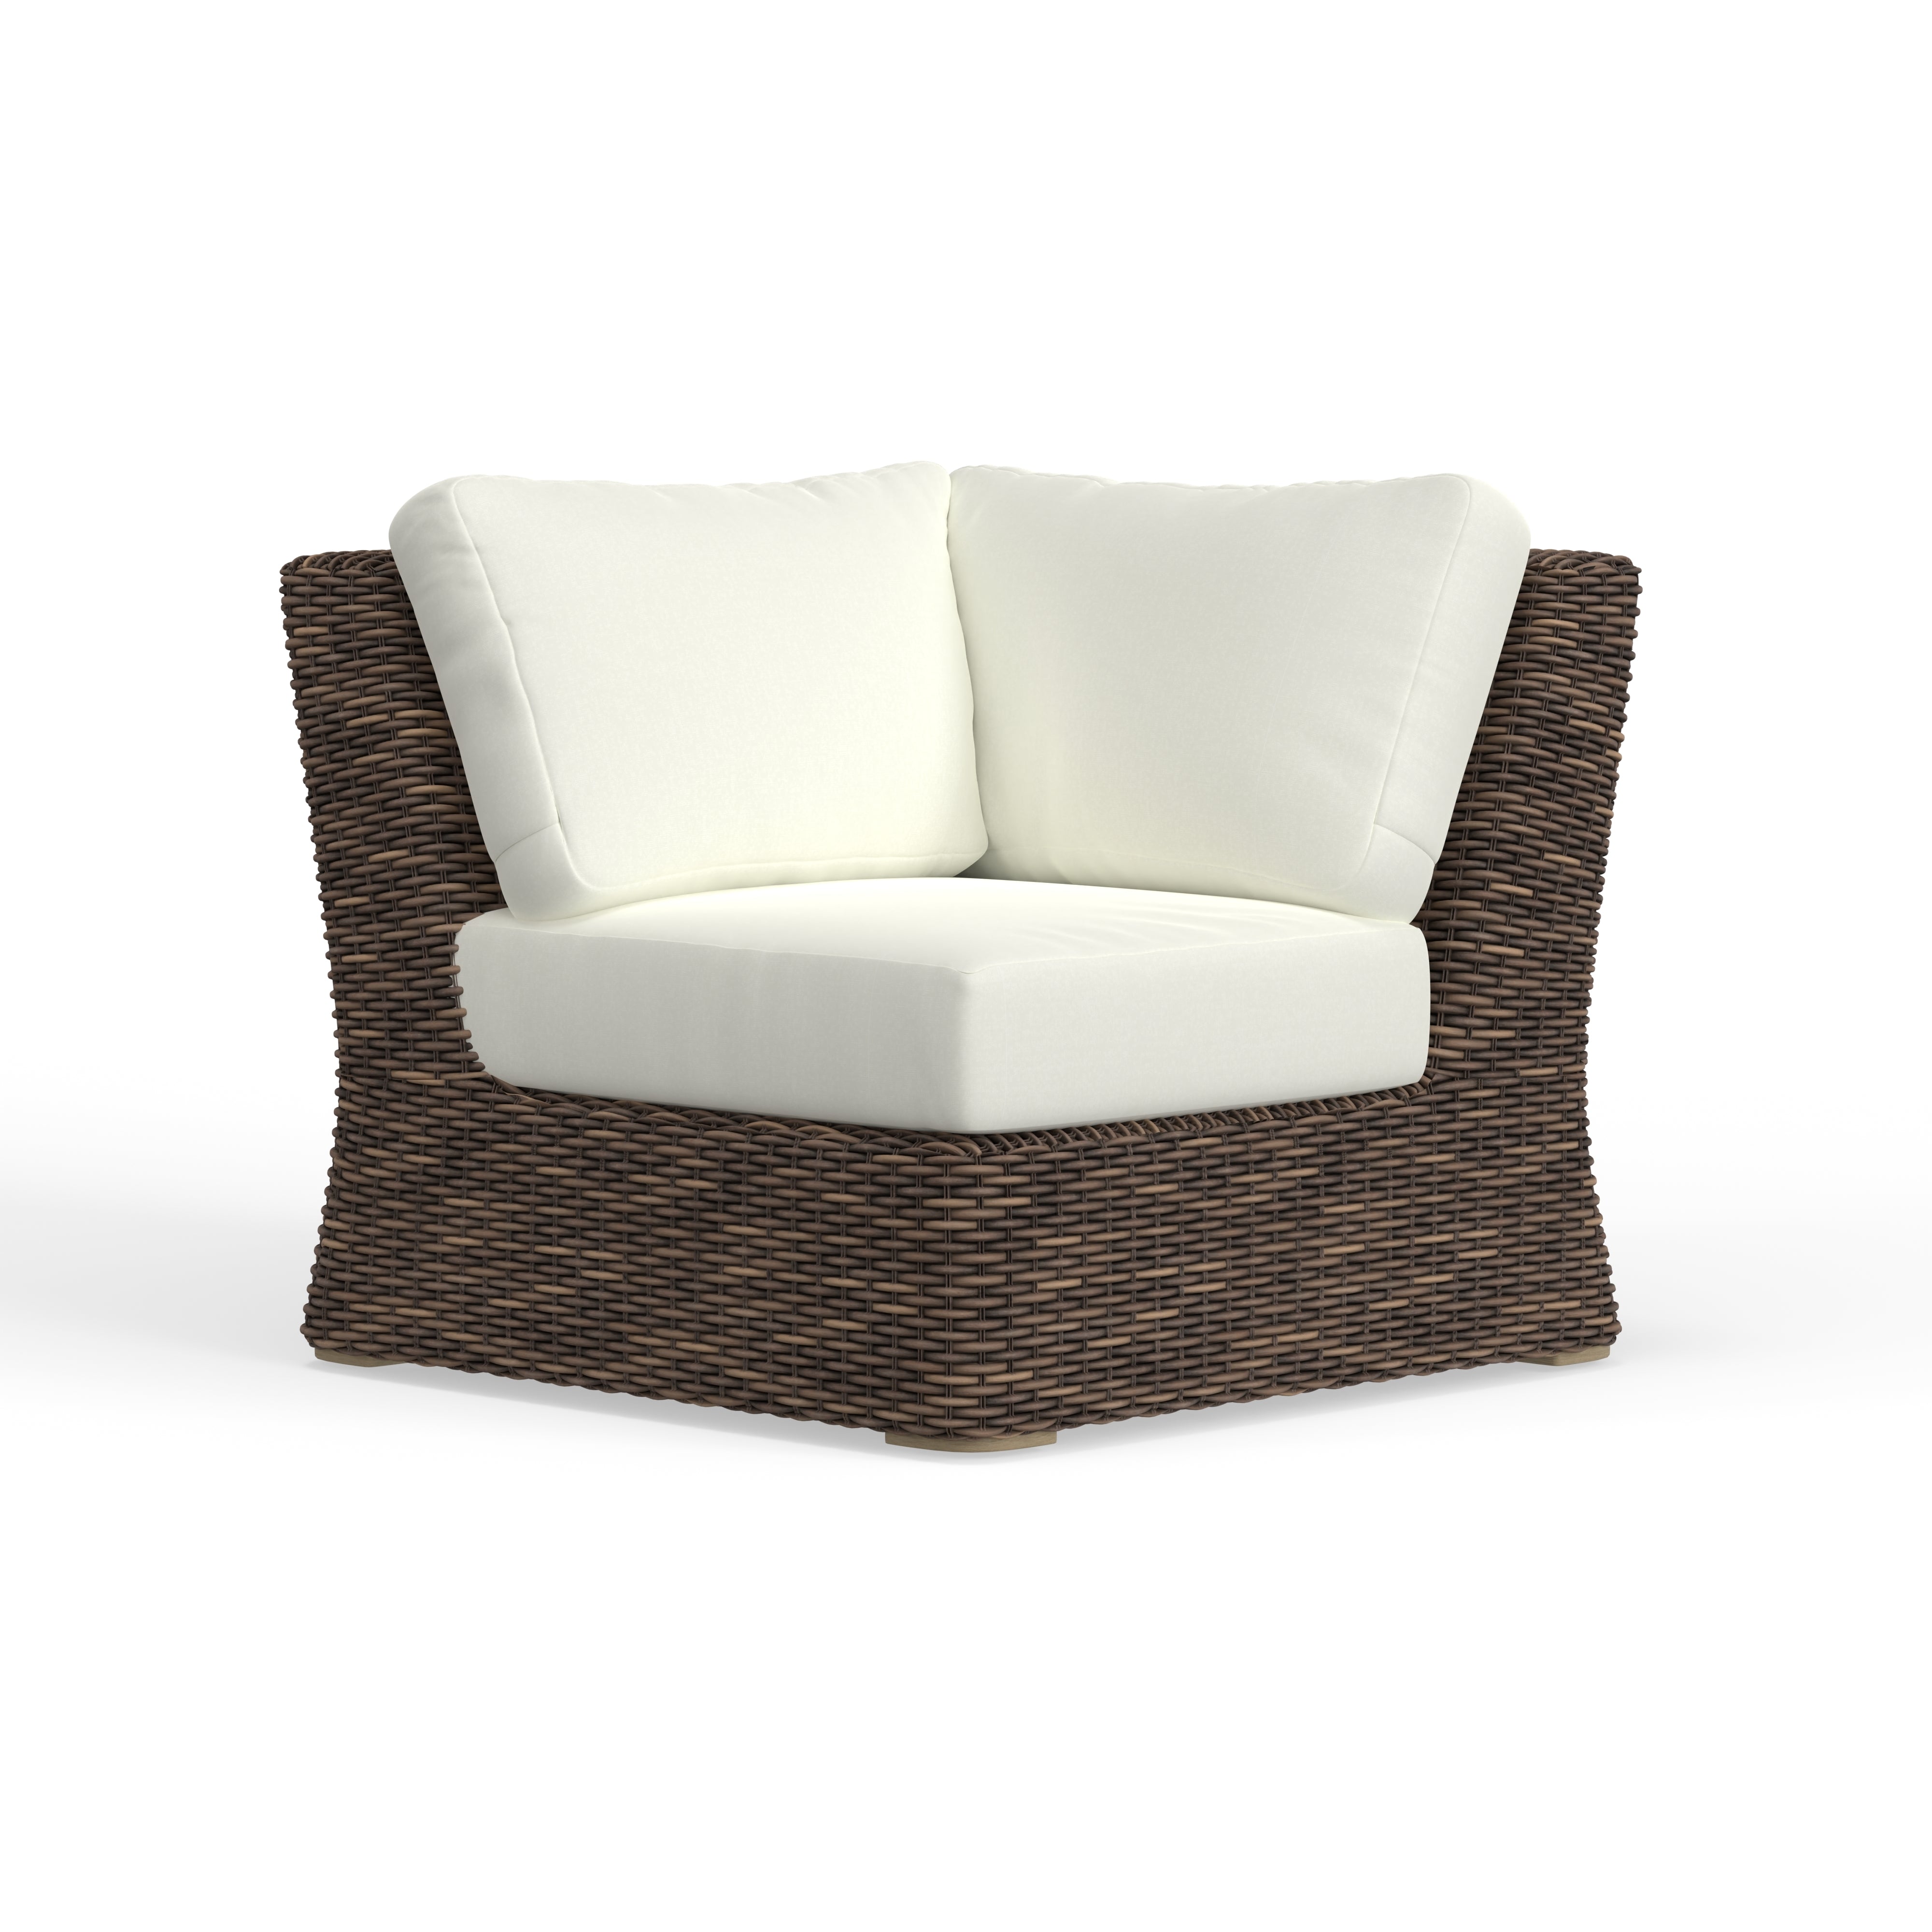 Best Wicker Sectional Furniture 